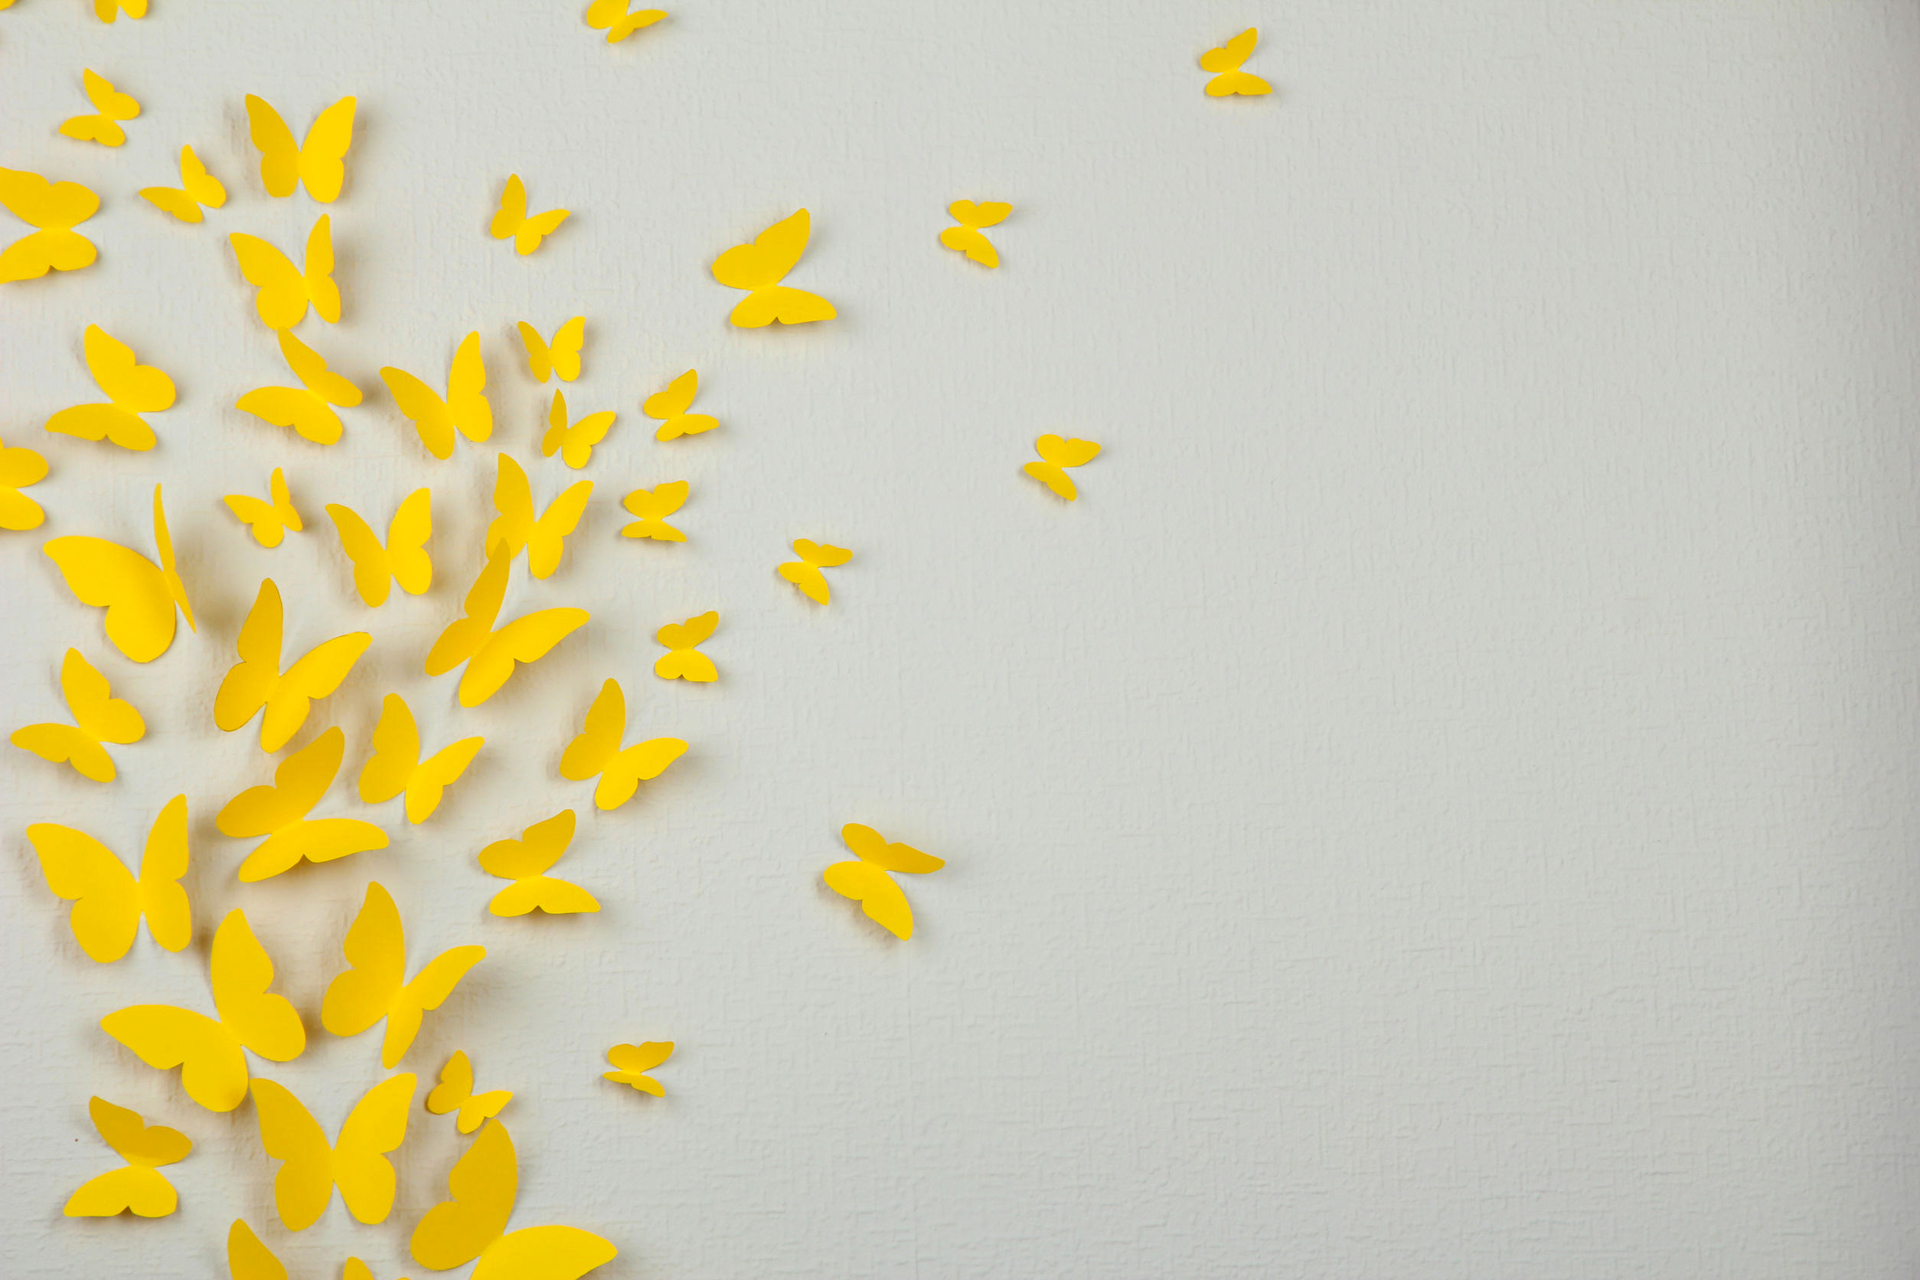 Image: Butterfly, yellow, paper, gray background